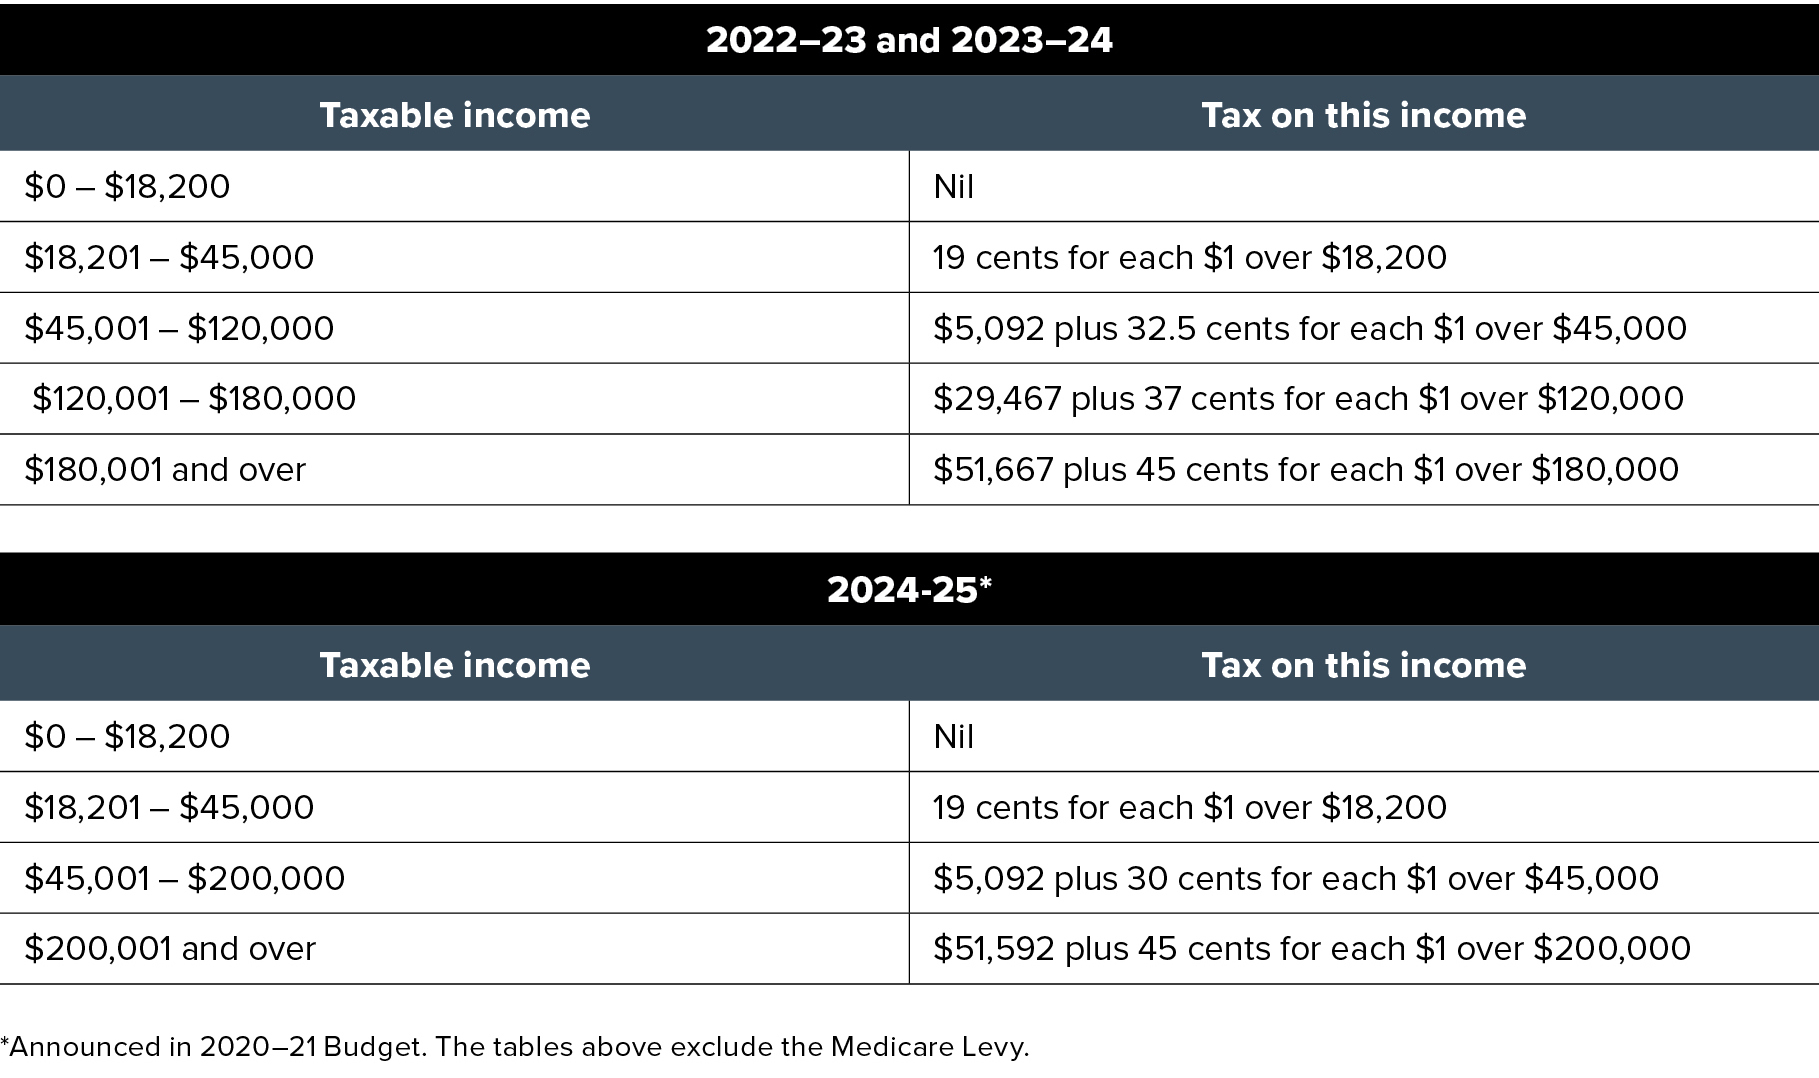 federal-budget-2023-24-personal-income-tax-pitcher-partners